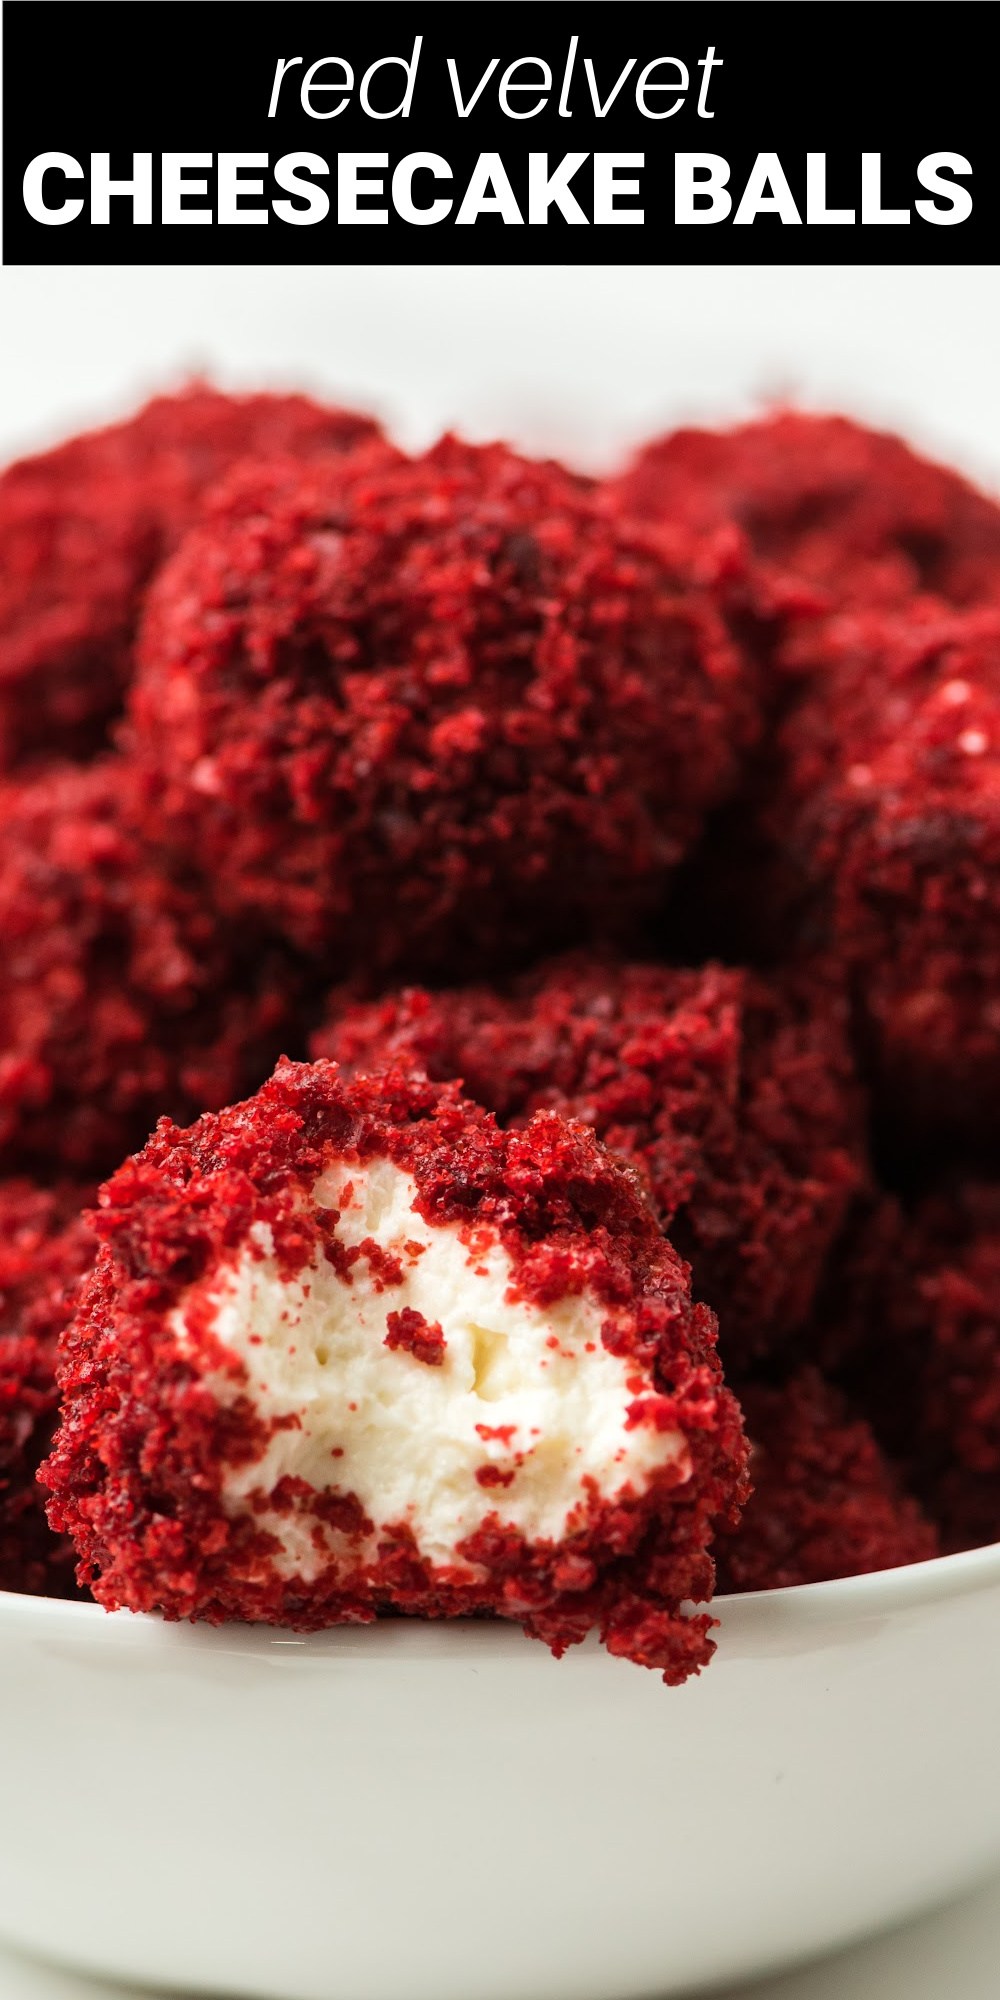 These delicious Red Velvet Cheesecake Balls are a sweet bite-sized combination of no bake cheesecake and red velvet cake! They're a super easy to make mini dessert that just perfect for a special treat!